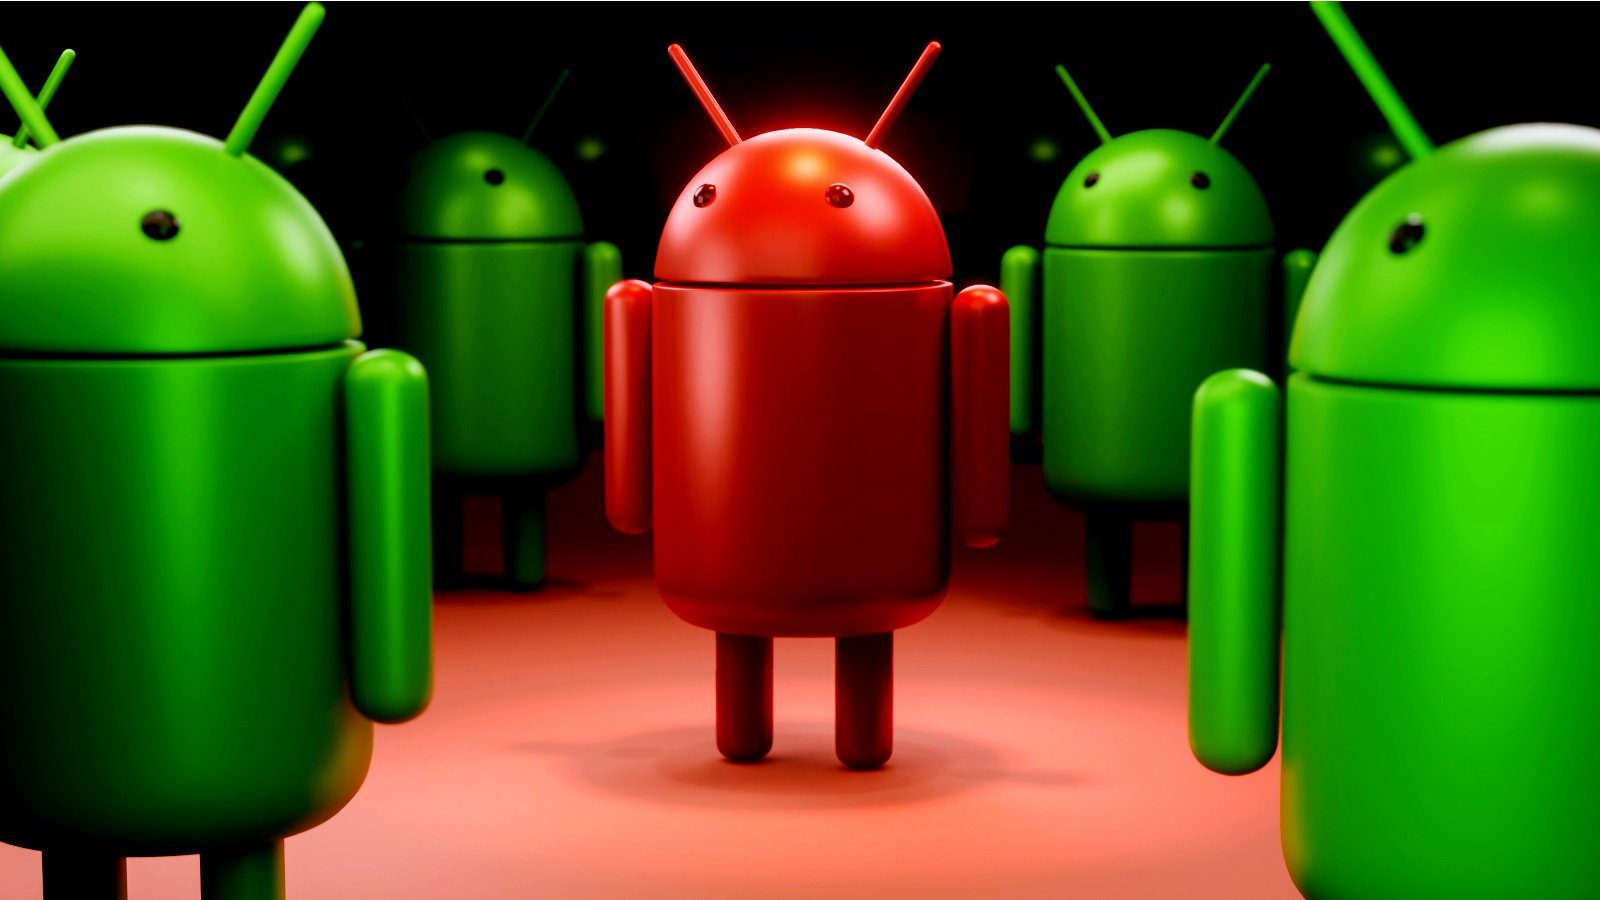 Cybercrime gang pre-infects millions of Android devices with malware – Source: www.bleepingcomputer.com